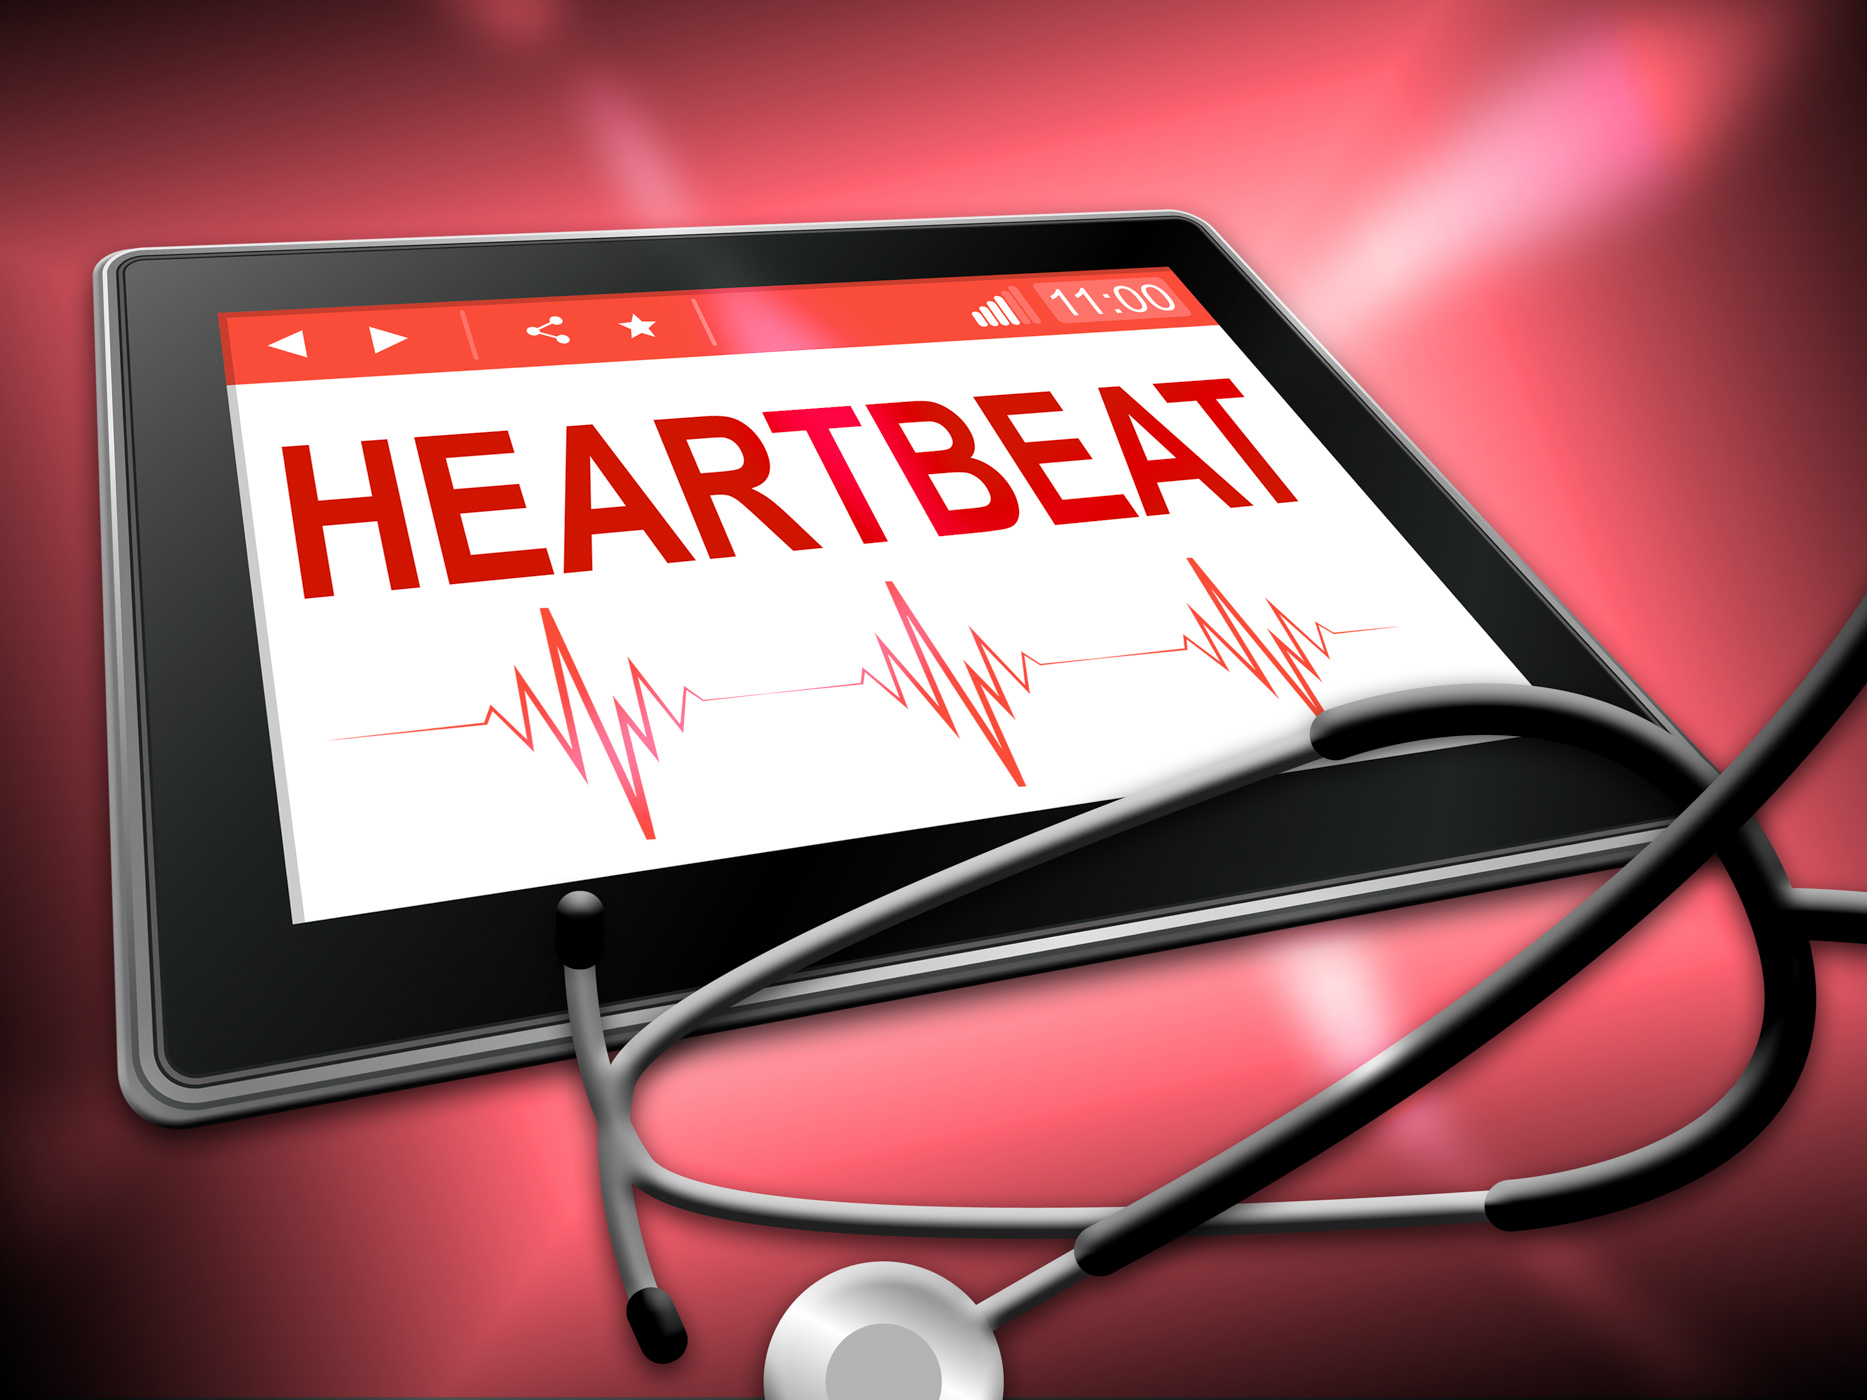 Heartbeat tablet means pulse trace and cardiology photo